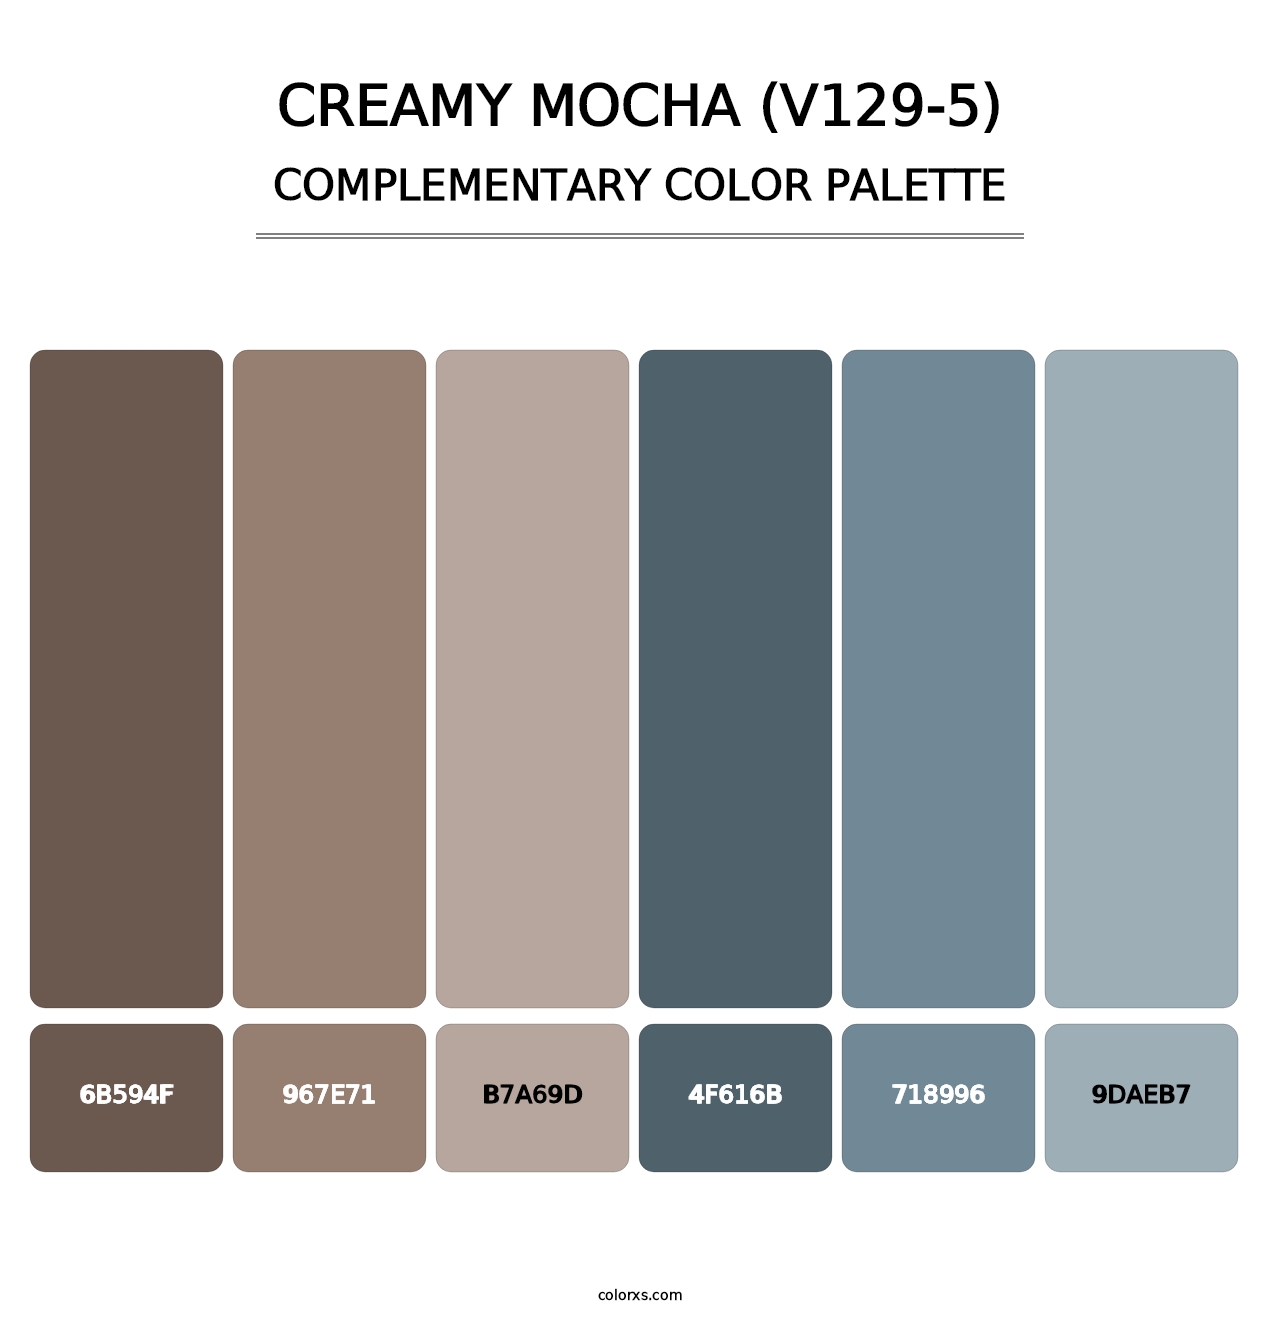 Creamy Mocha (V129-5) - Complementary Color Palette